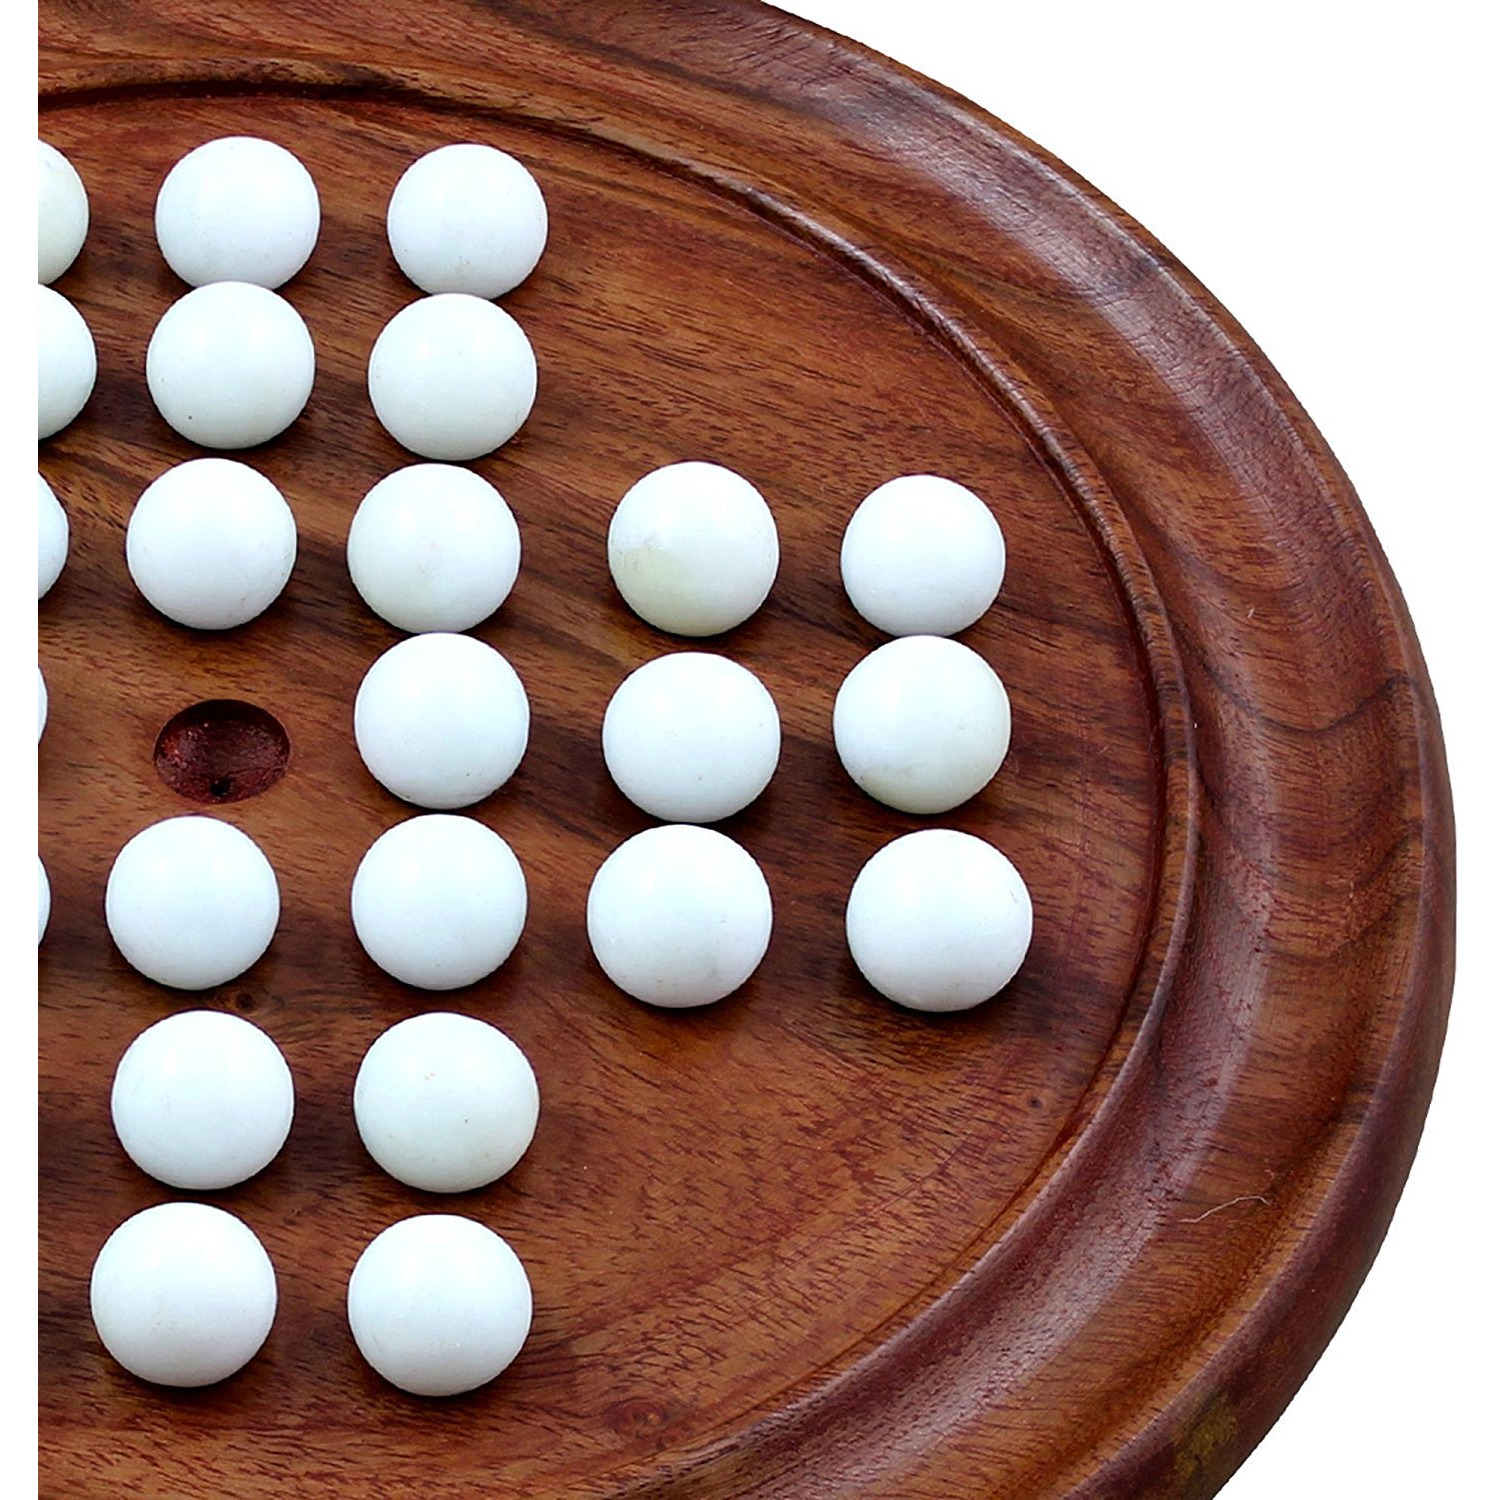 Winmaarc Handmade Games Solitaire Board In Wood With Glass Marbles